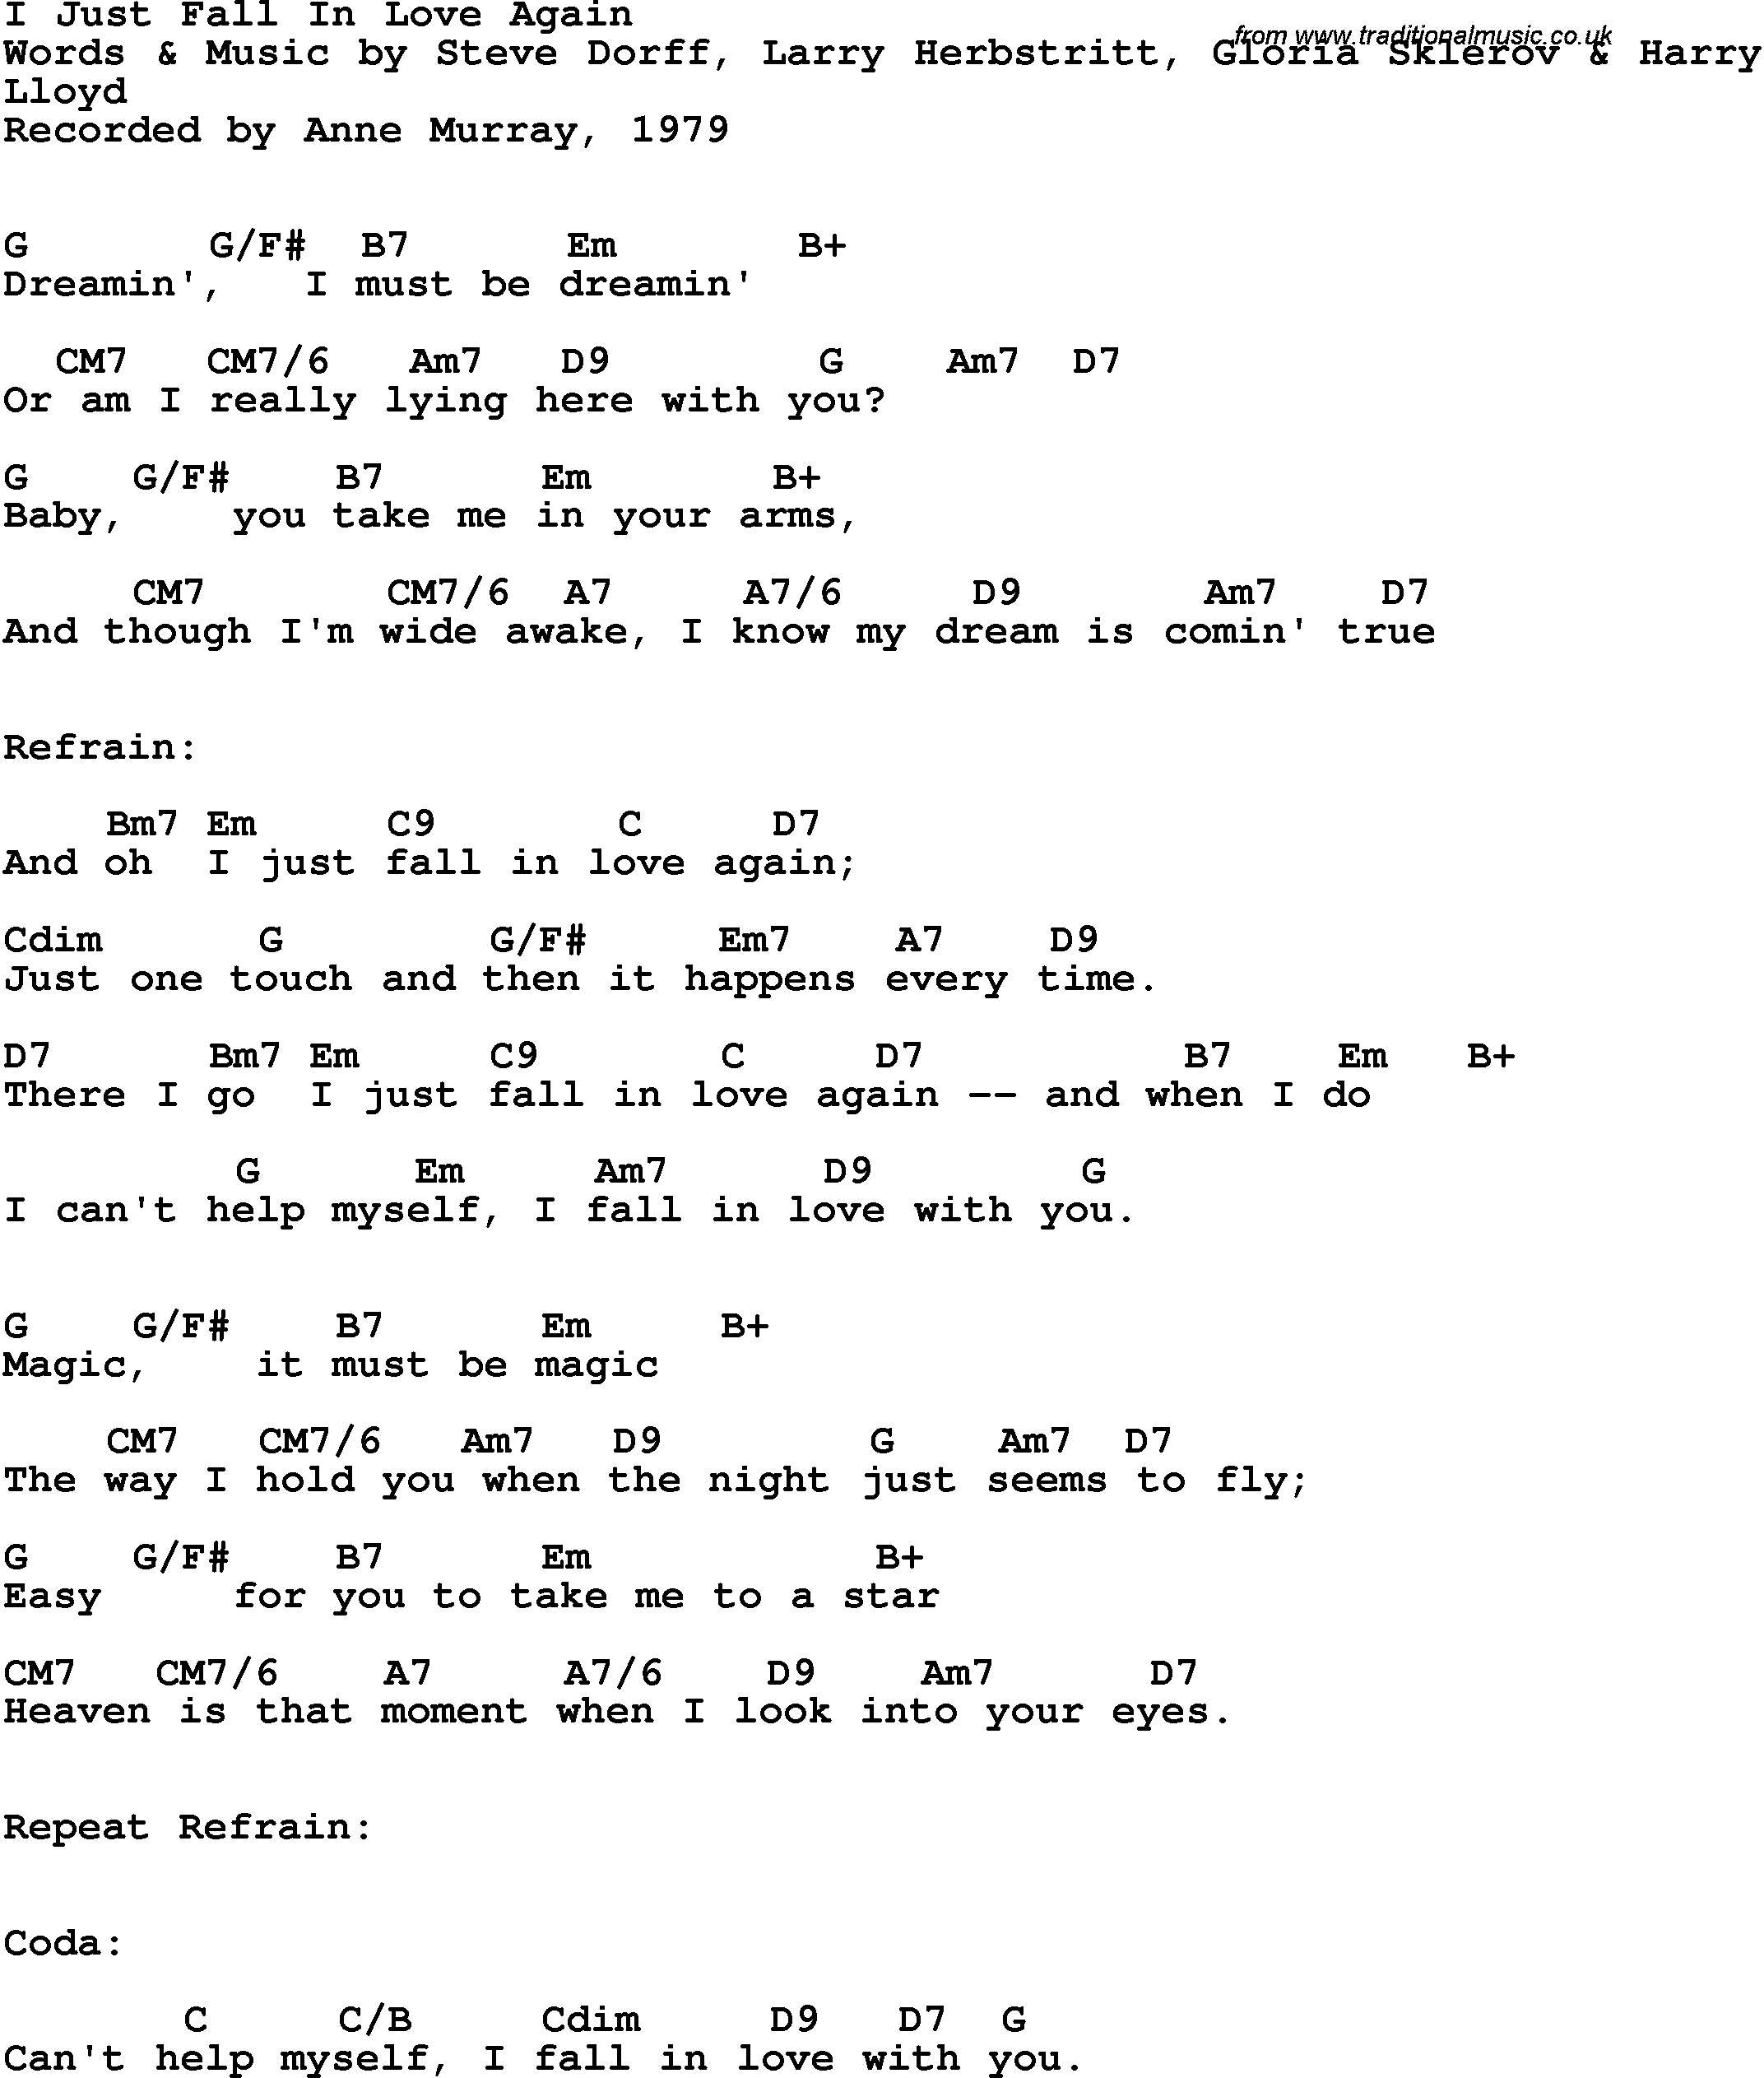 Song Lyrics with guitar chords for I Just Fall In Love Again - Anne Murray, 1979